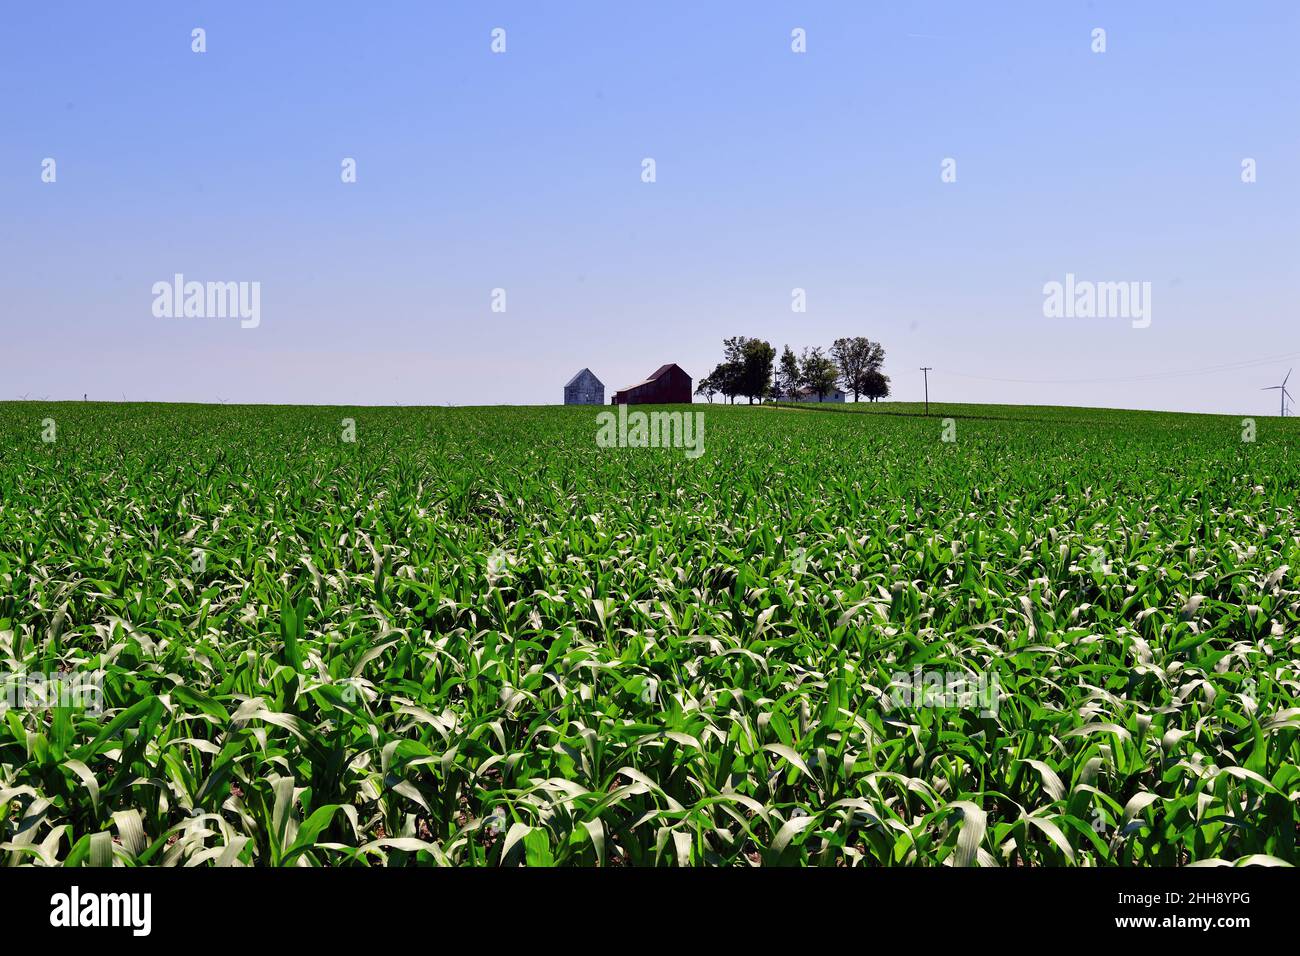 Malta, Illinois, USA. An expanse of young corn growing as far as the eye can see only interrupted by farm buildings in the distant background. Stock Photo